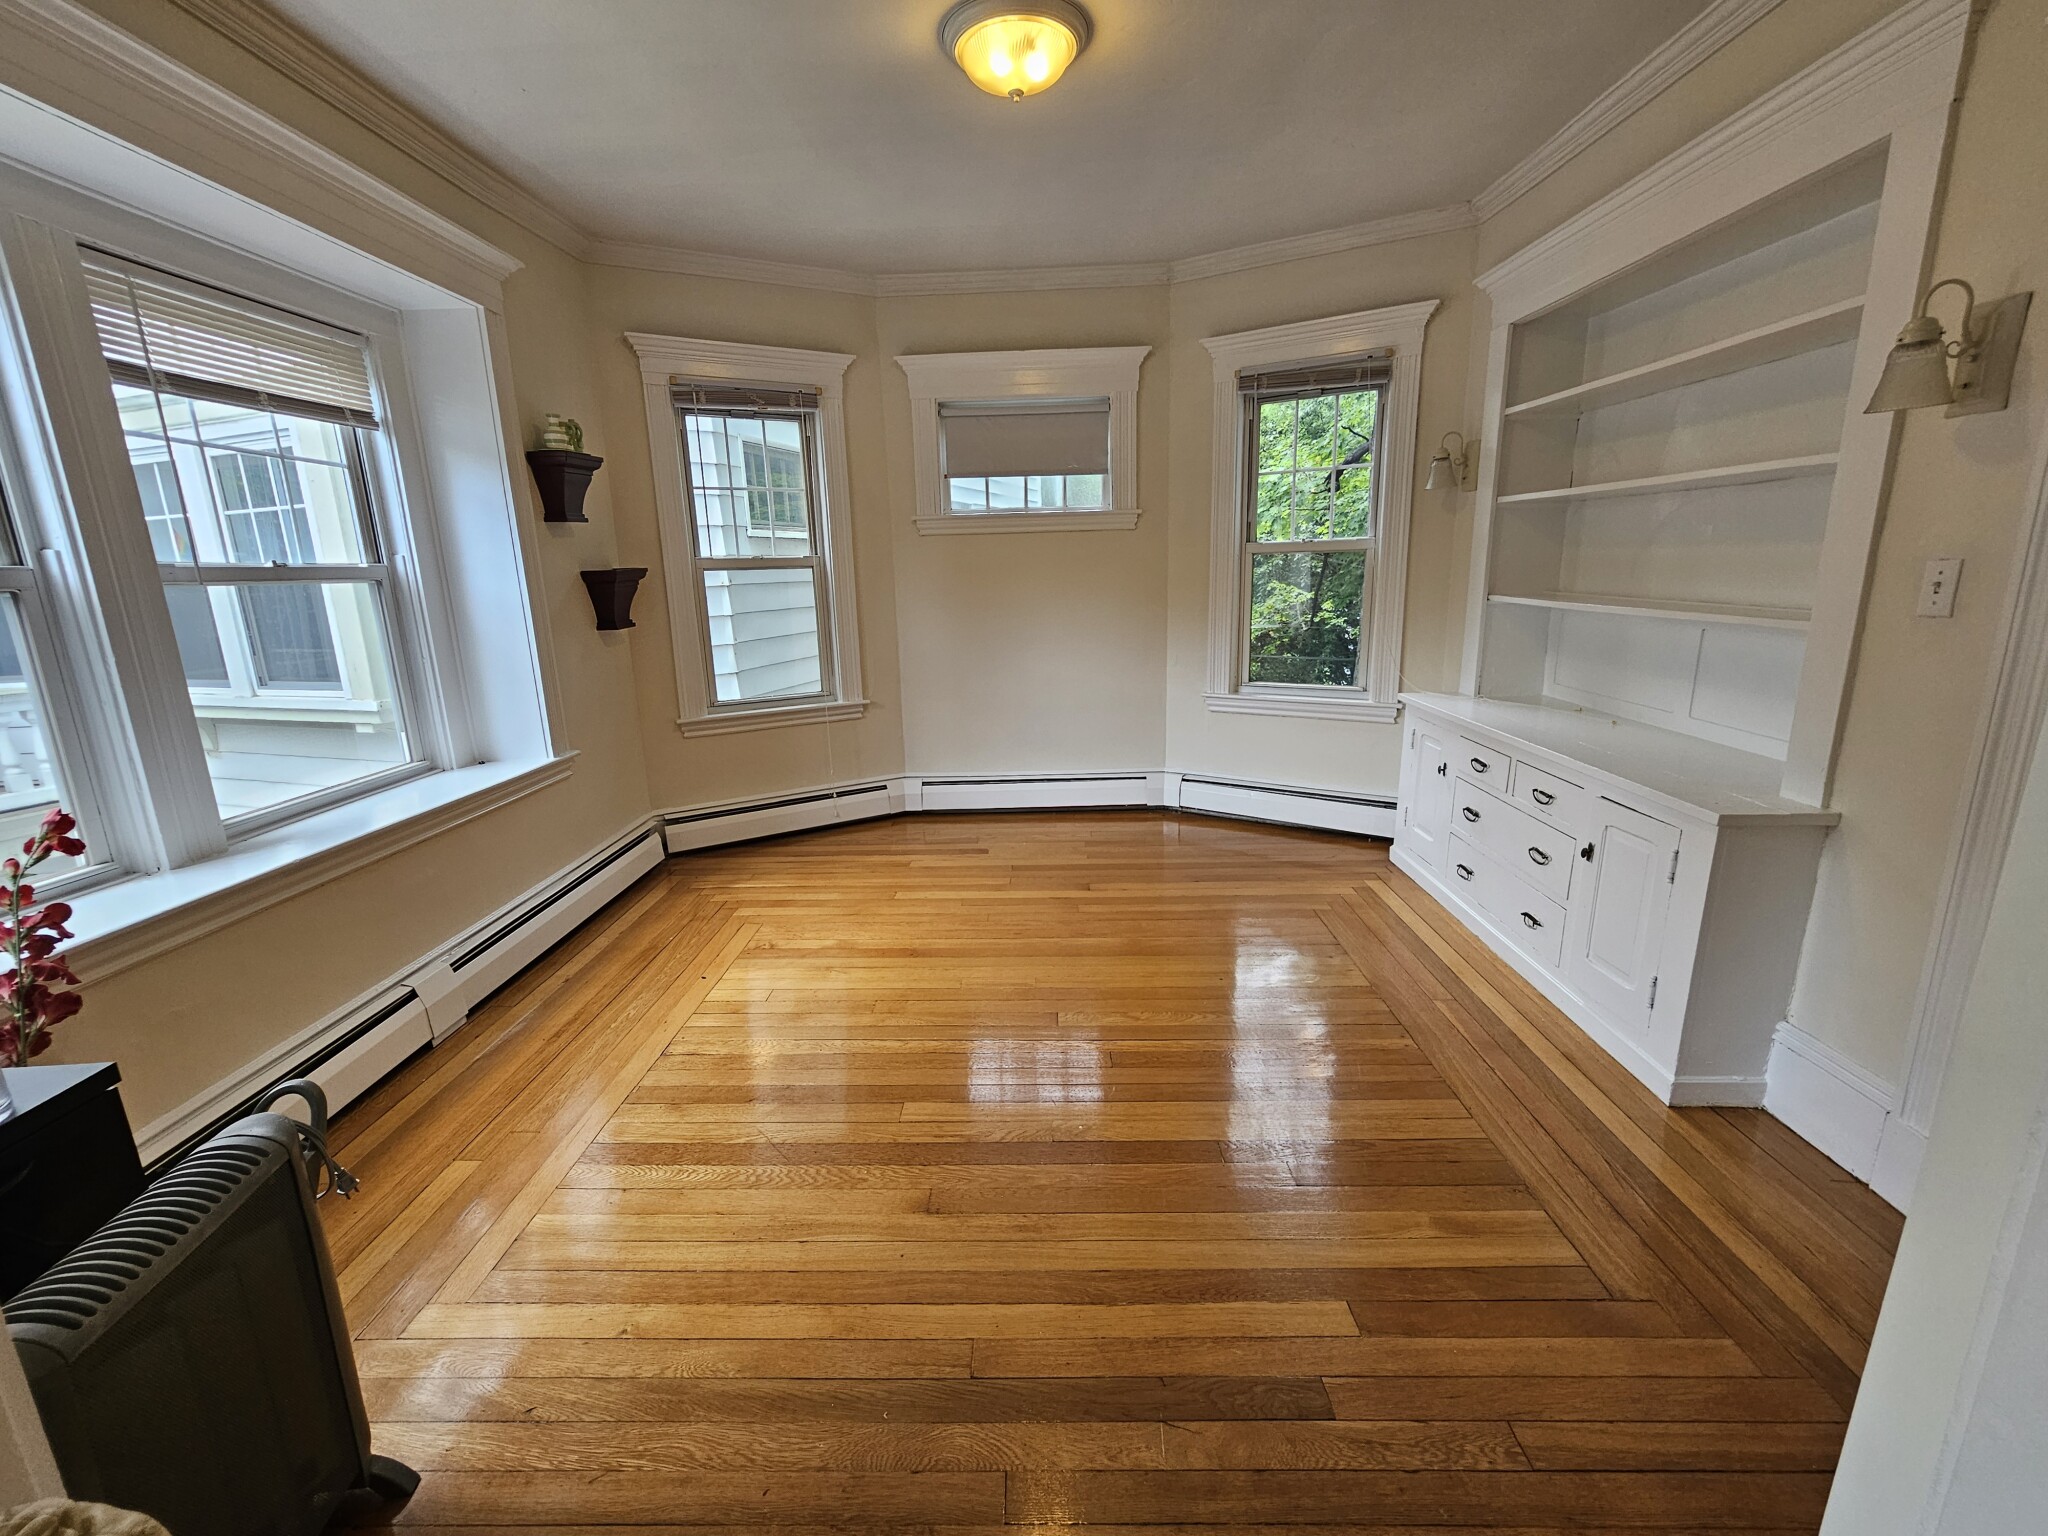 Photos of apartment on Middlesex,Brookline MA 02467